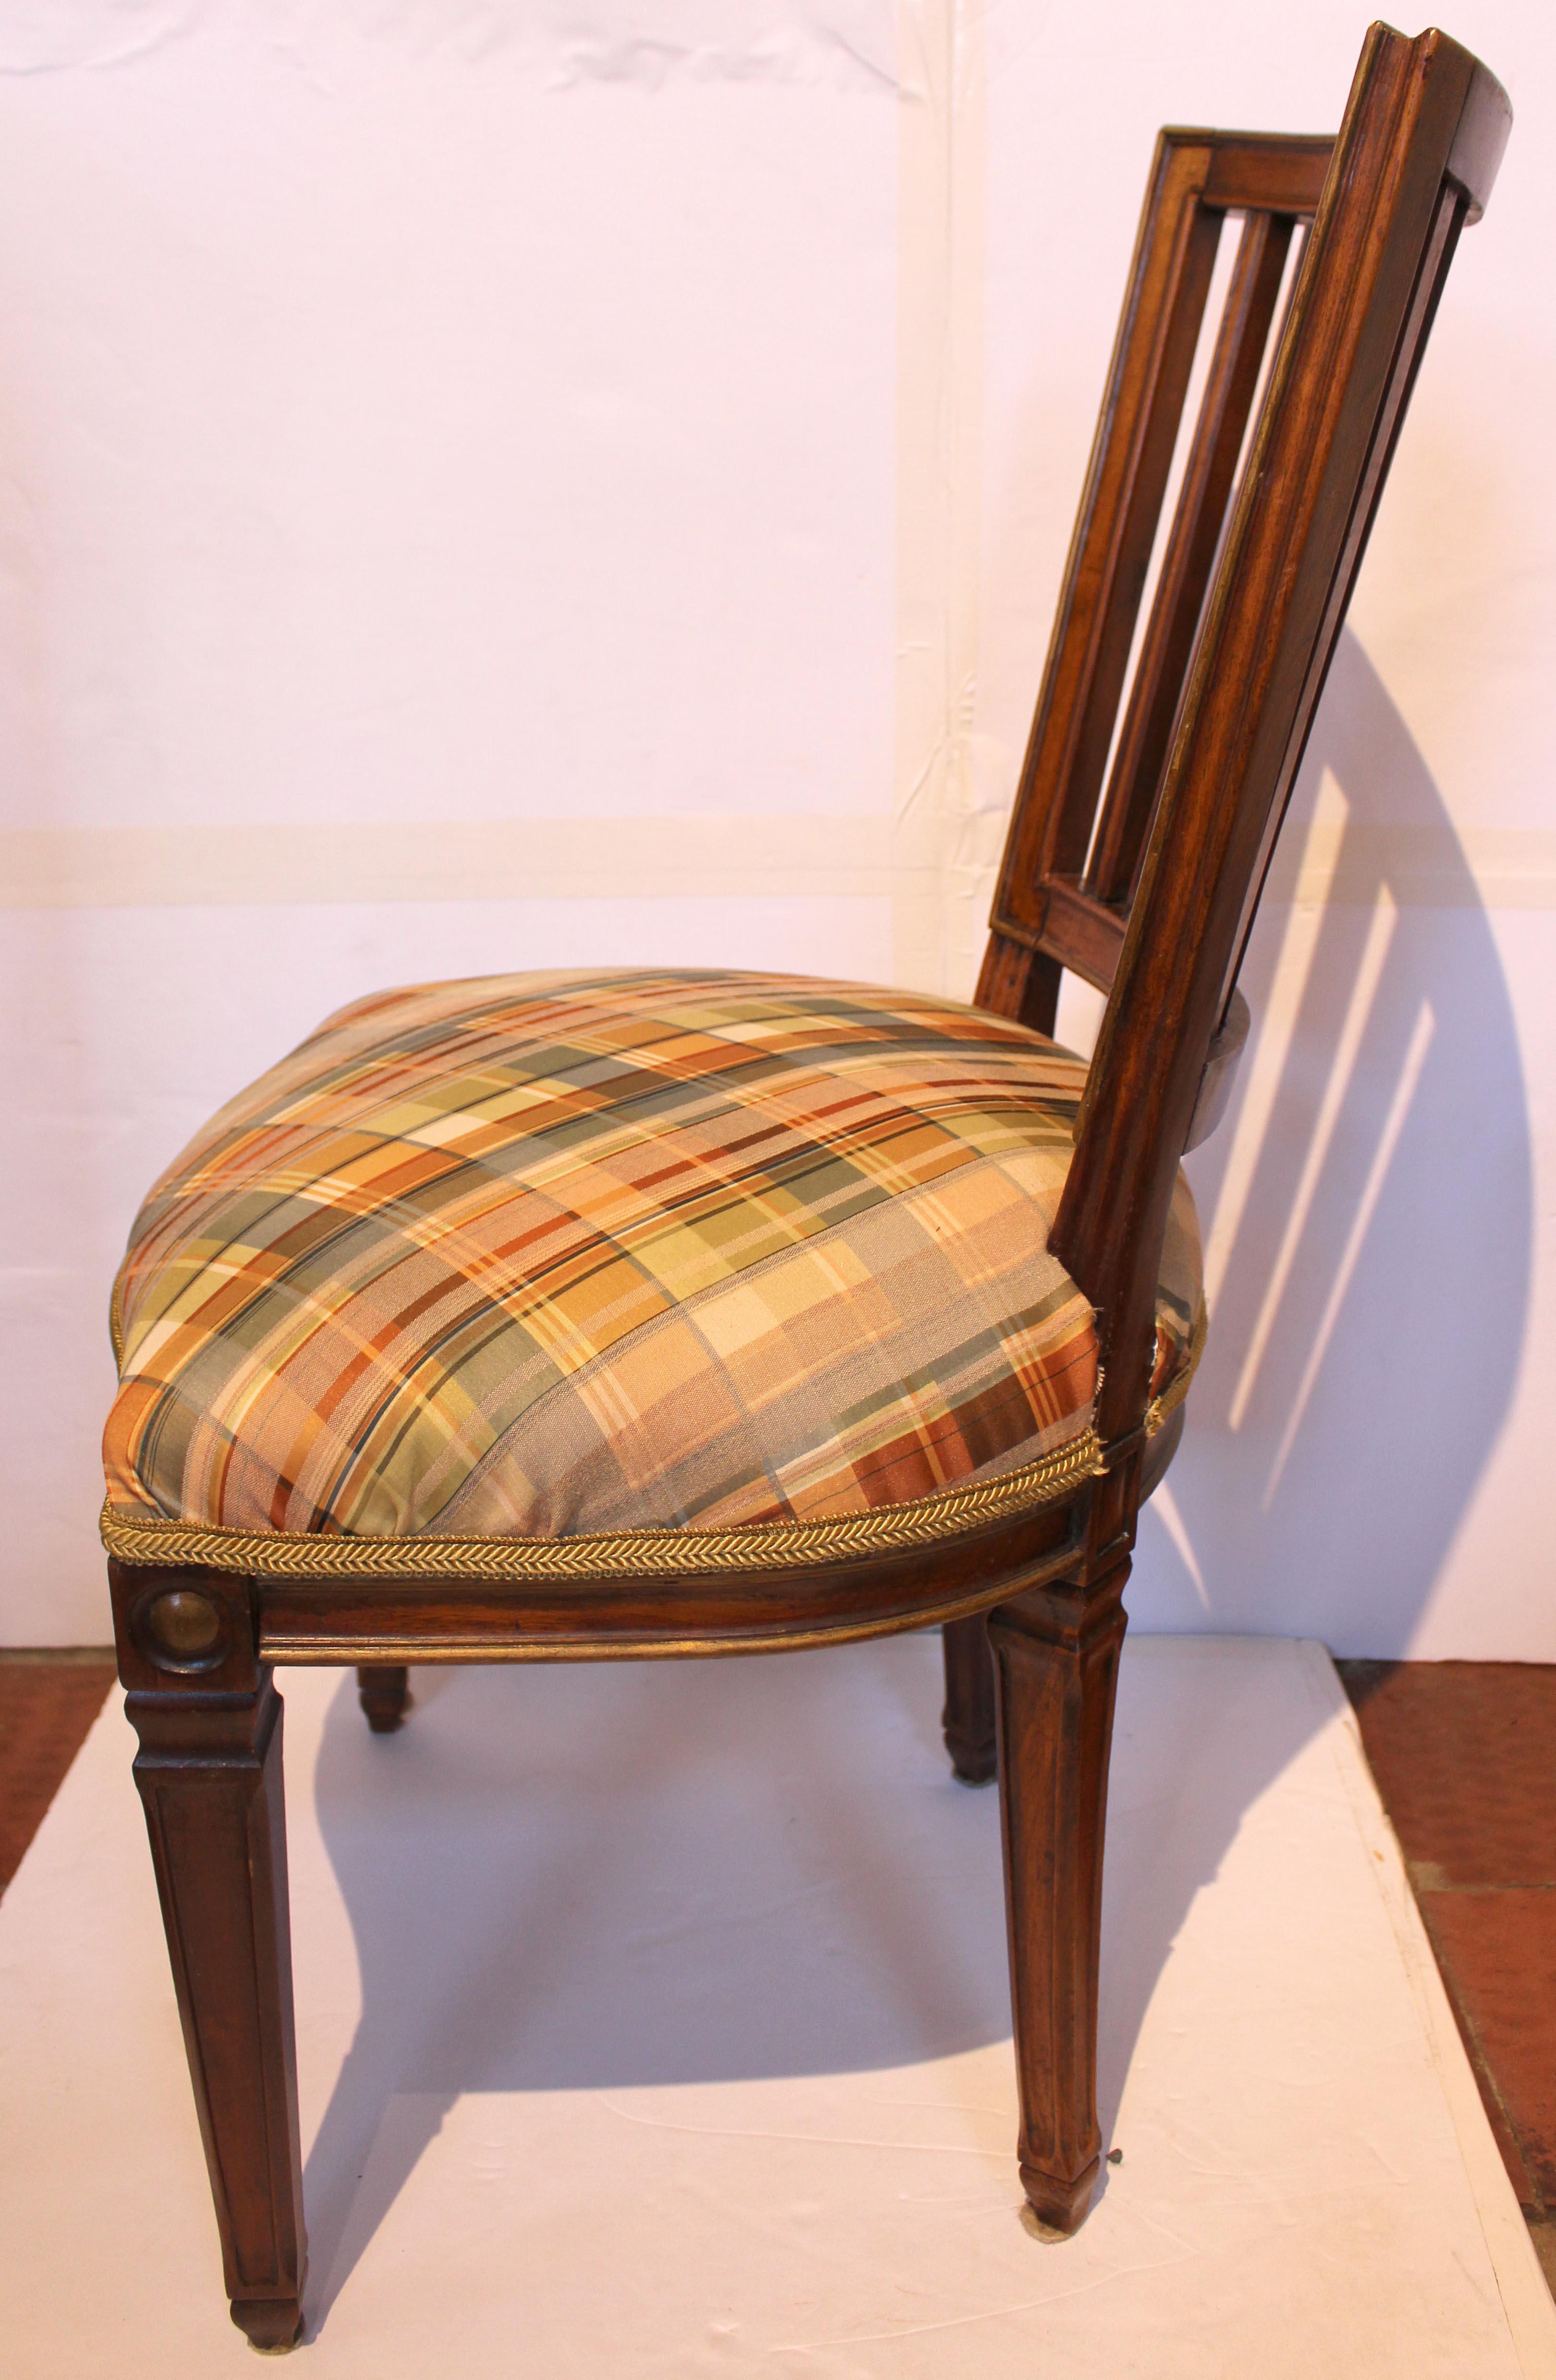 Circa 1870 French Louis XVI Style Side Chair In Good Condition For Sale In Chapel Hill, NC